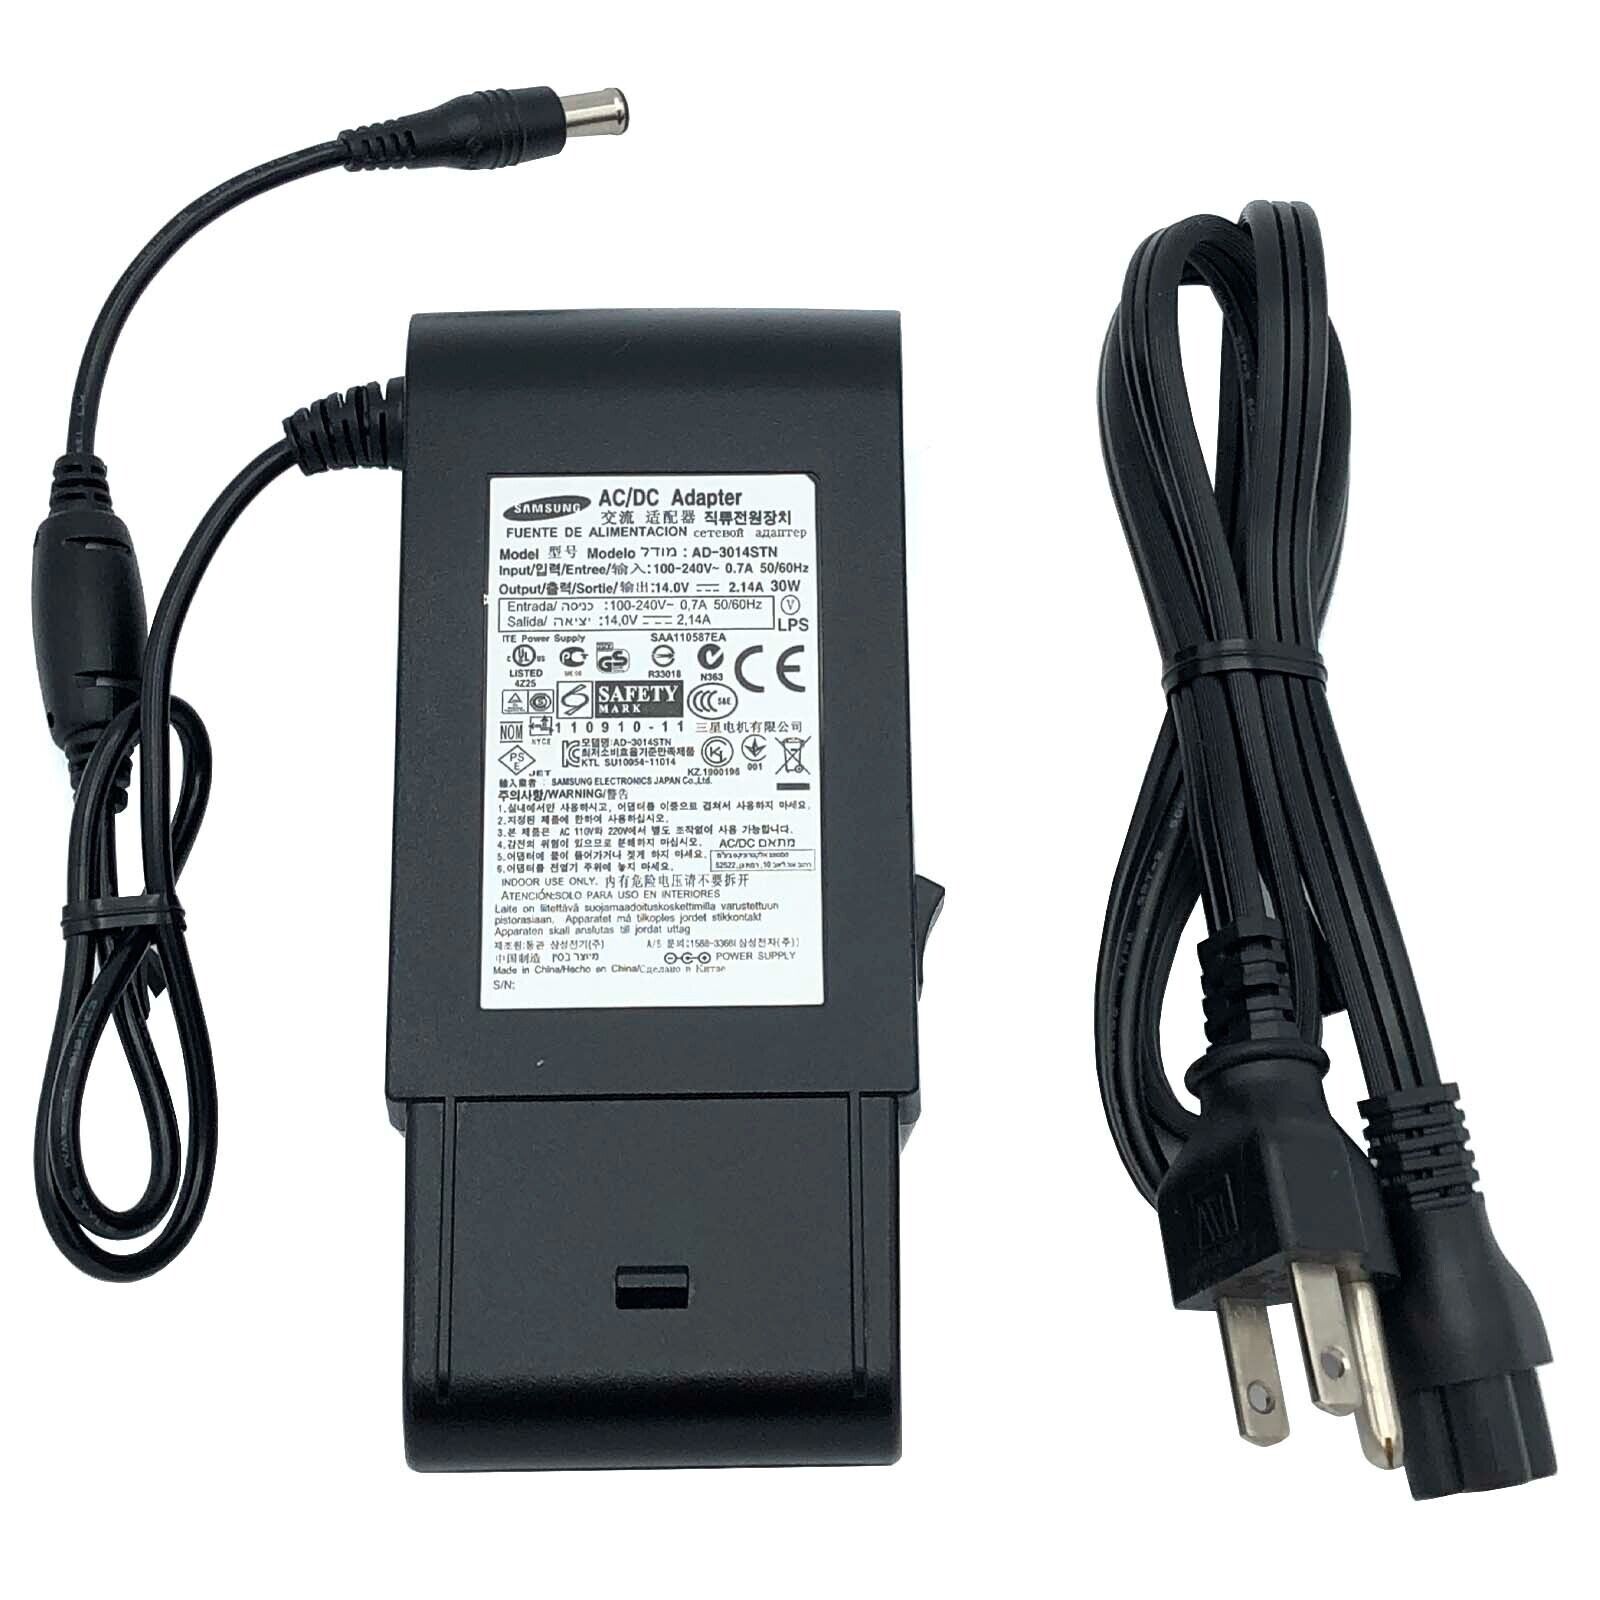 Genuine Samsung Power Adapter for SyncMaster S24 - Series LED Monitors